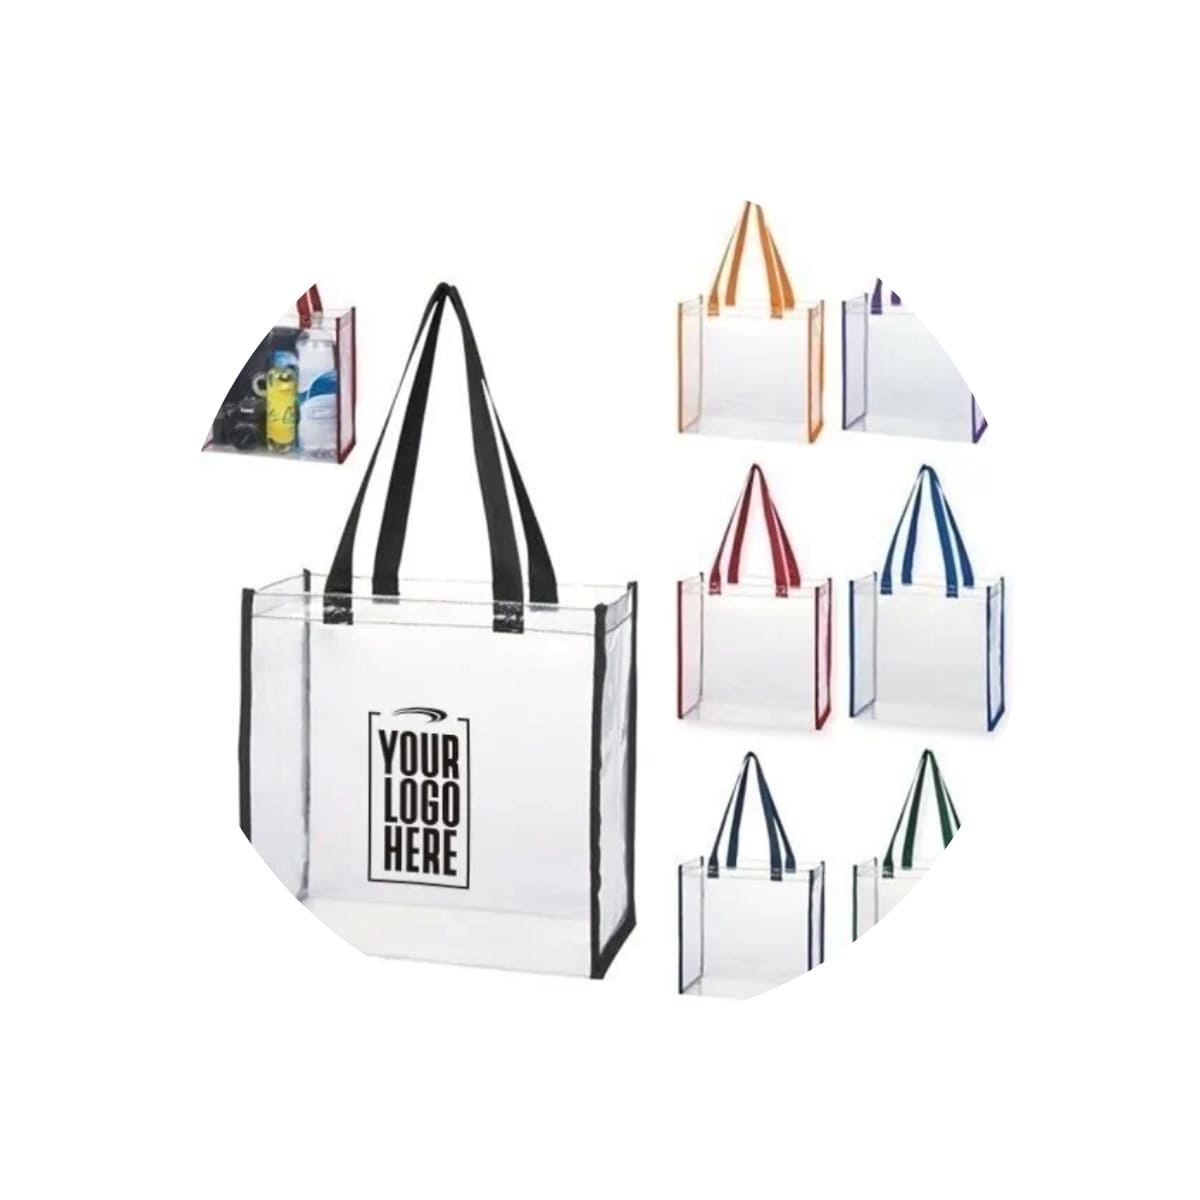 How do people use branded tote bags?